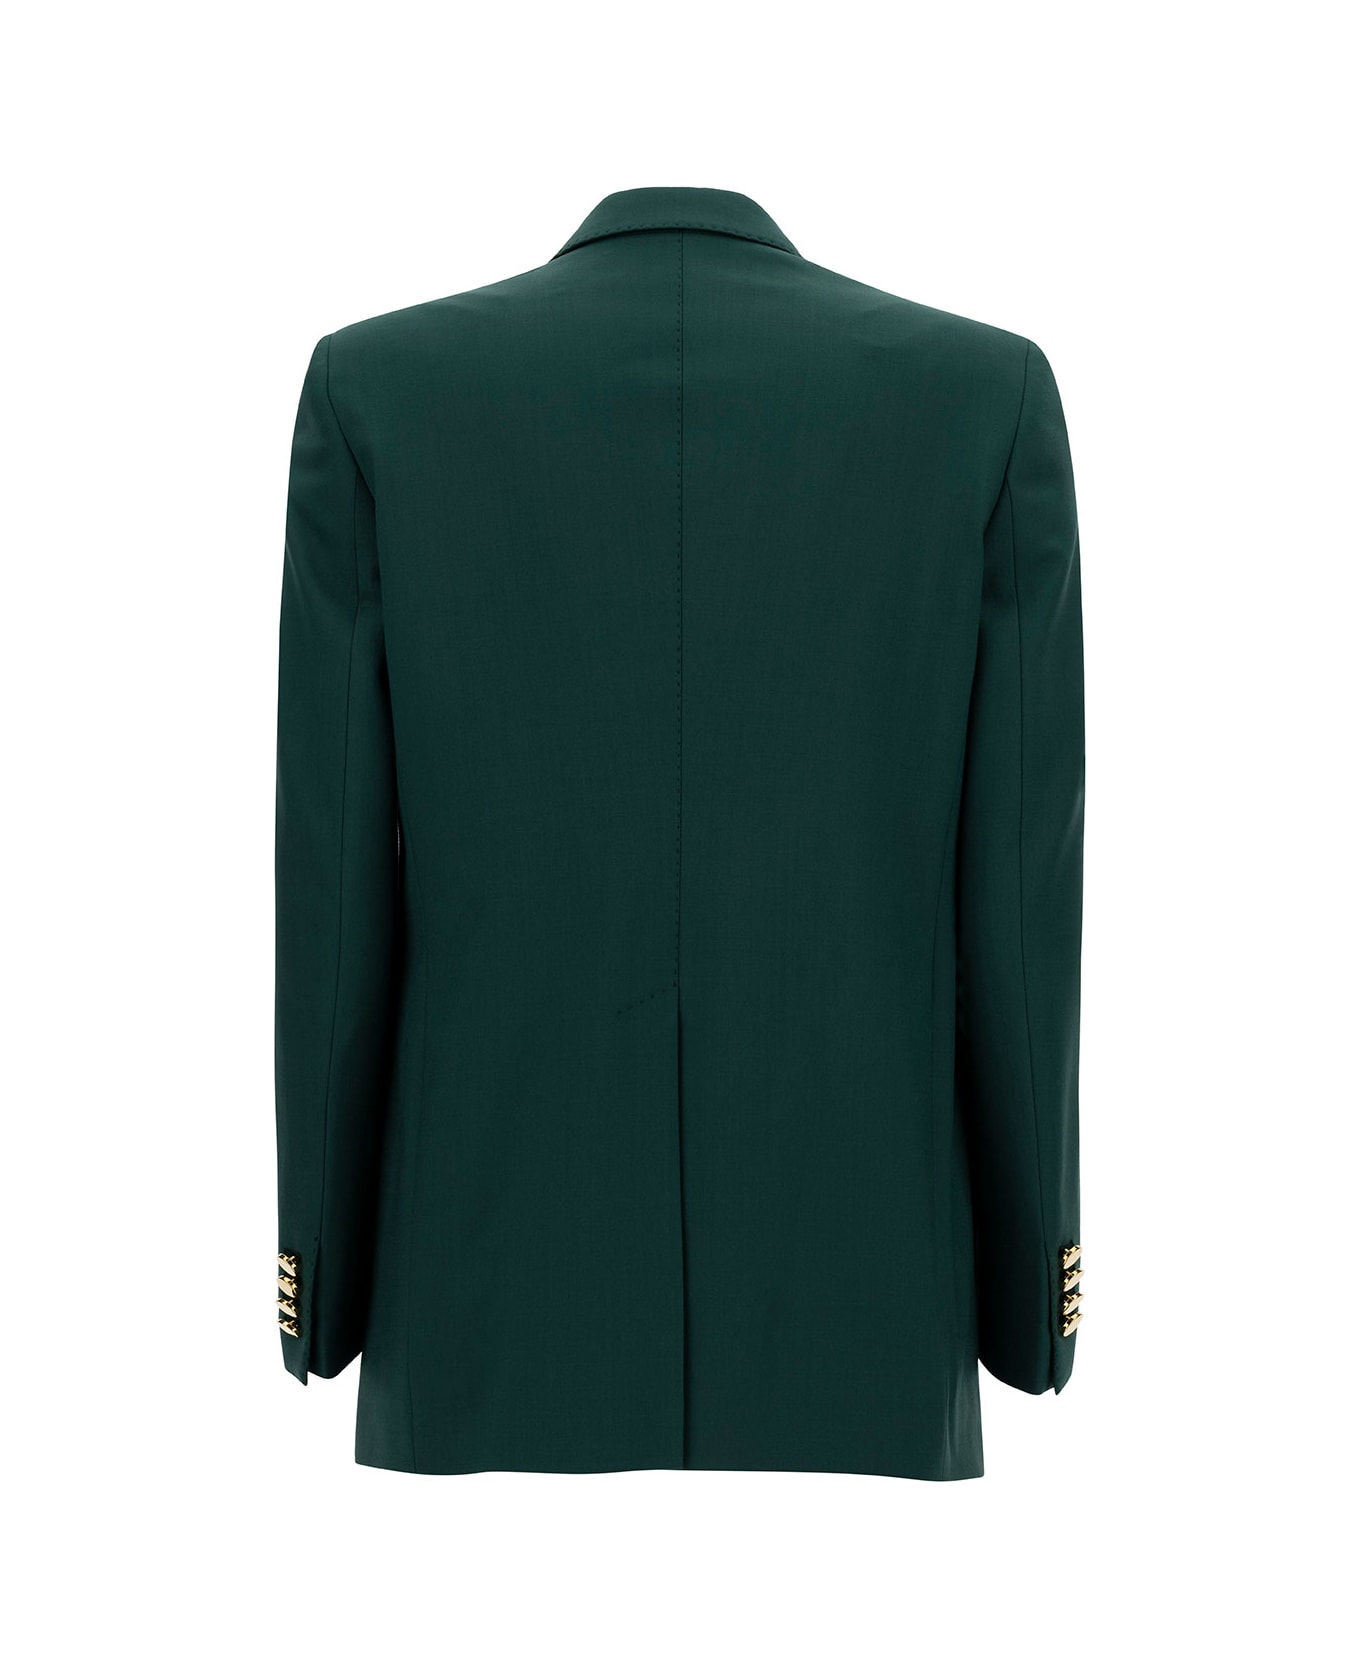 Tagliatore 'jasmine' Green Double-breasted Jacket With Golden Buttons In Stretch Wool Blend Woman - Green コート